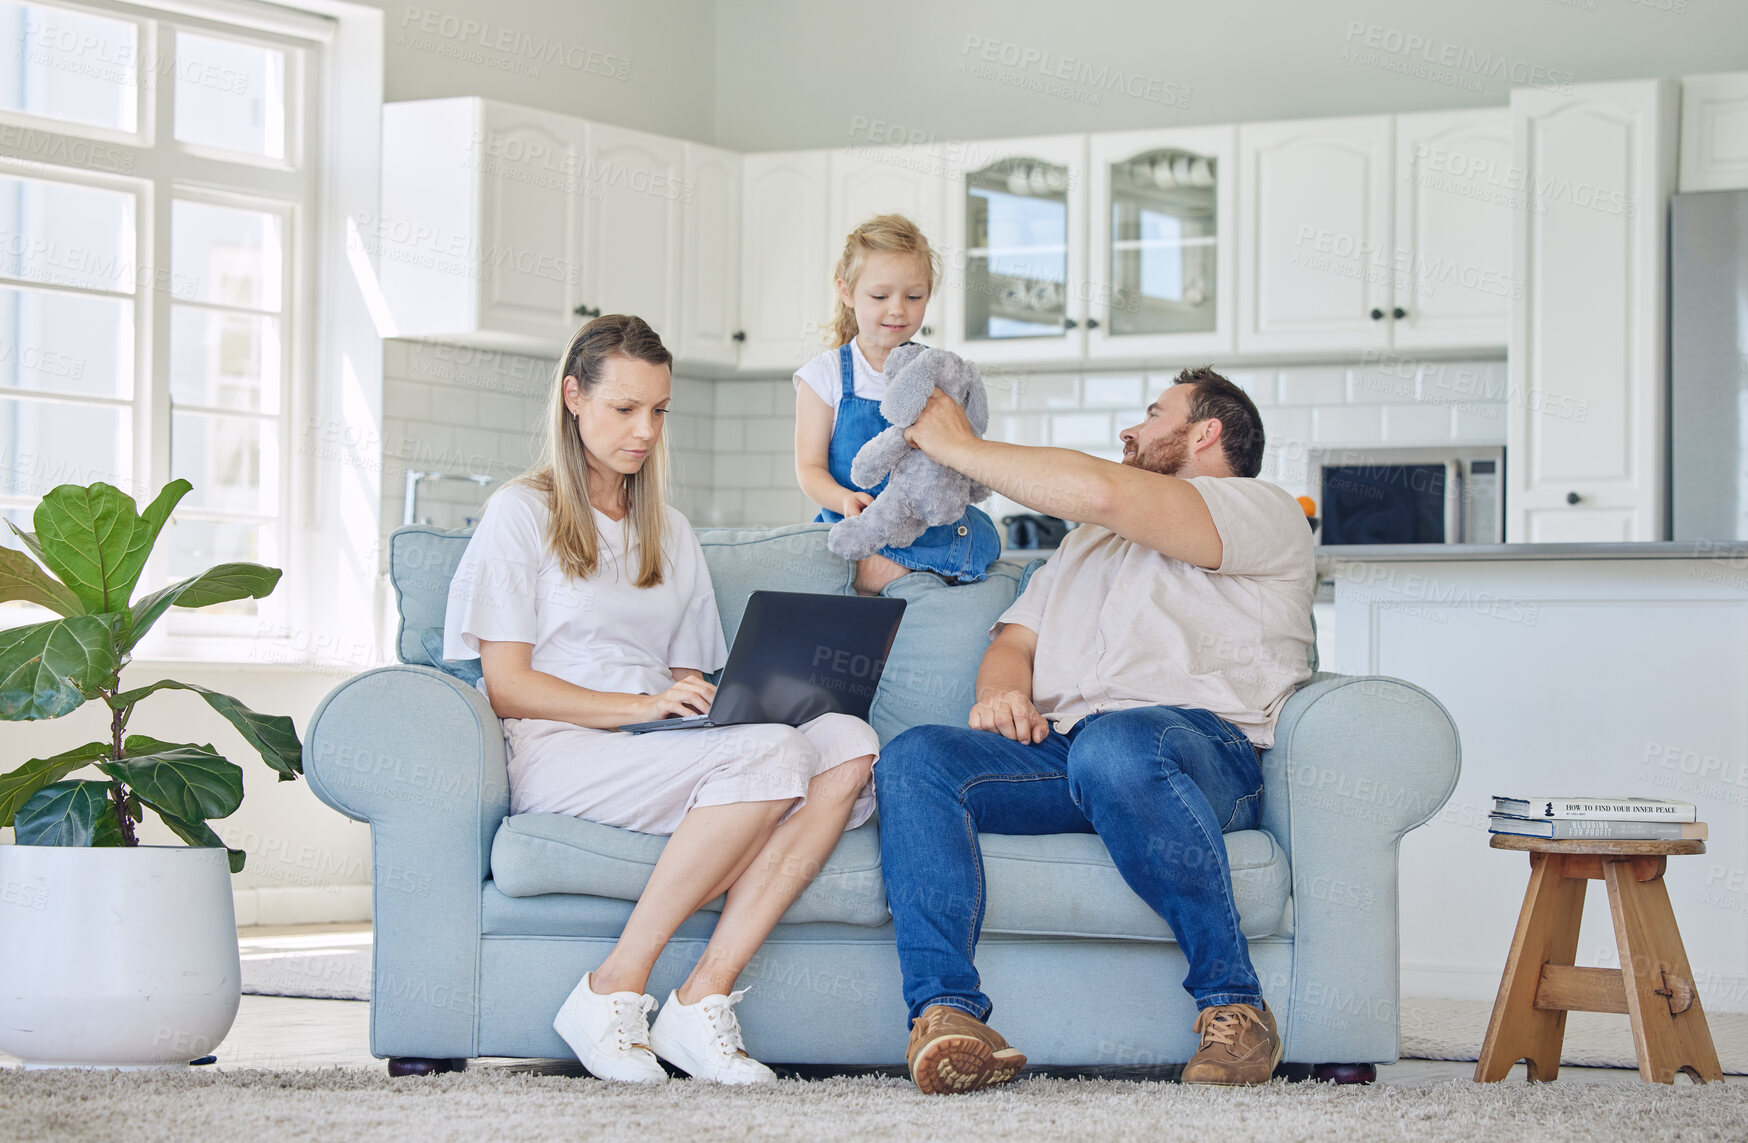 Buy stock photo Caucasian mother working on a laptop and sitting on the couch while her daughter and husband play with a teddybear in the lounge at home. Woman using a laptop. Father and child playing with a toy.